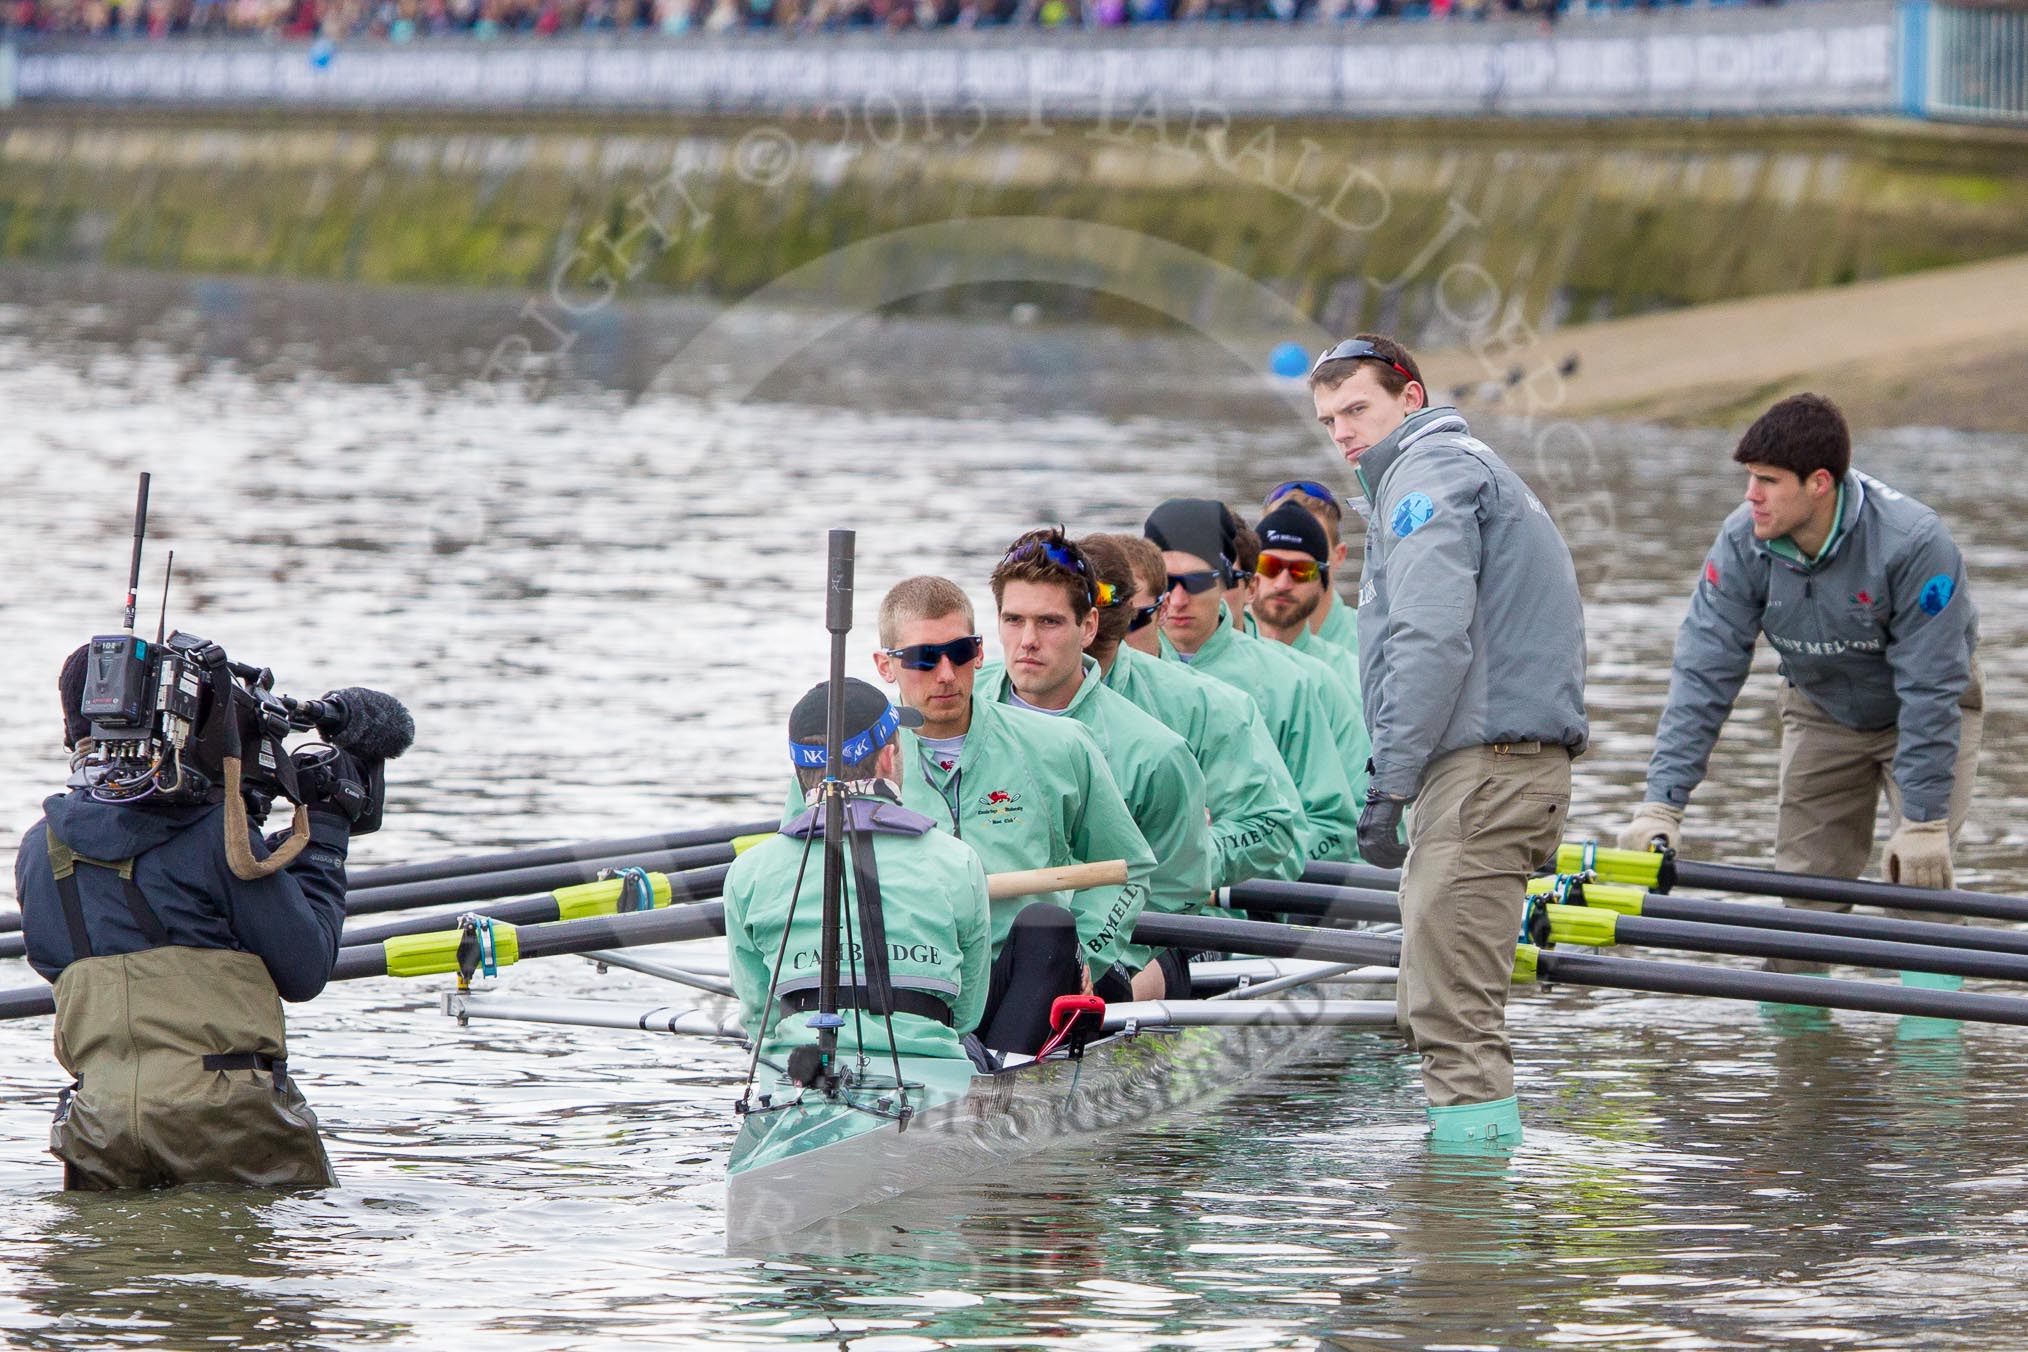 The Boat Race 2013.
Putney,
London SW15,

United Kingdom,
on 31 March 2013 at 15:48, image #170